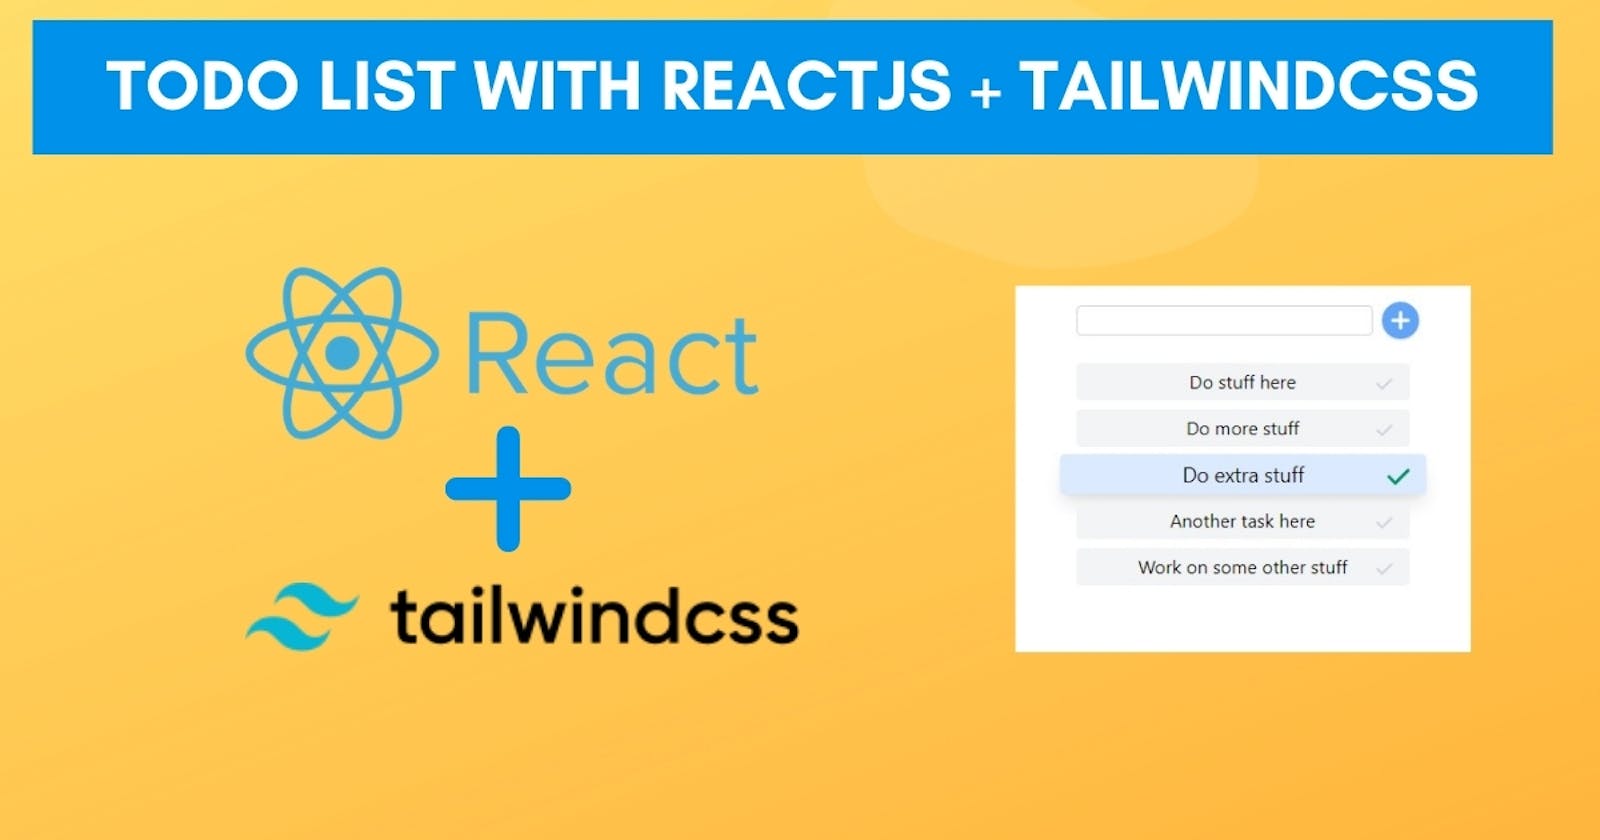 Learning ReactJS and TailwindCSS by making a simple To-Do List